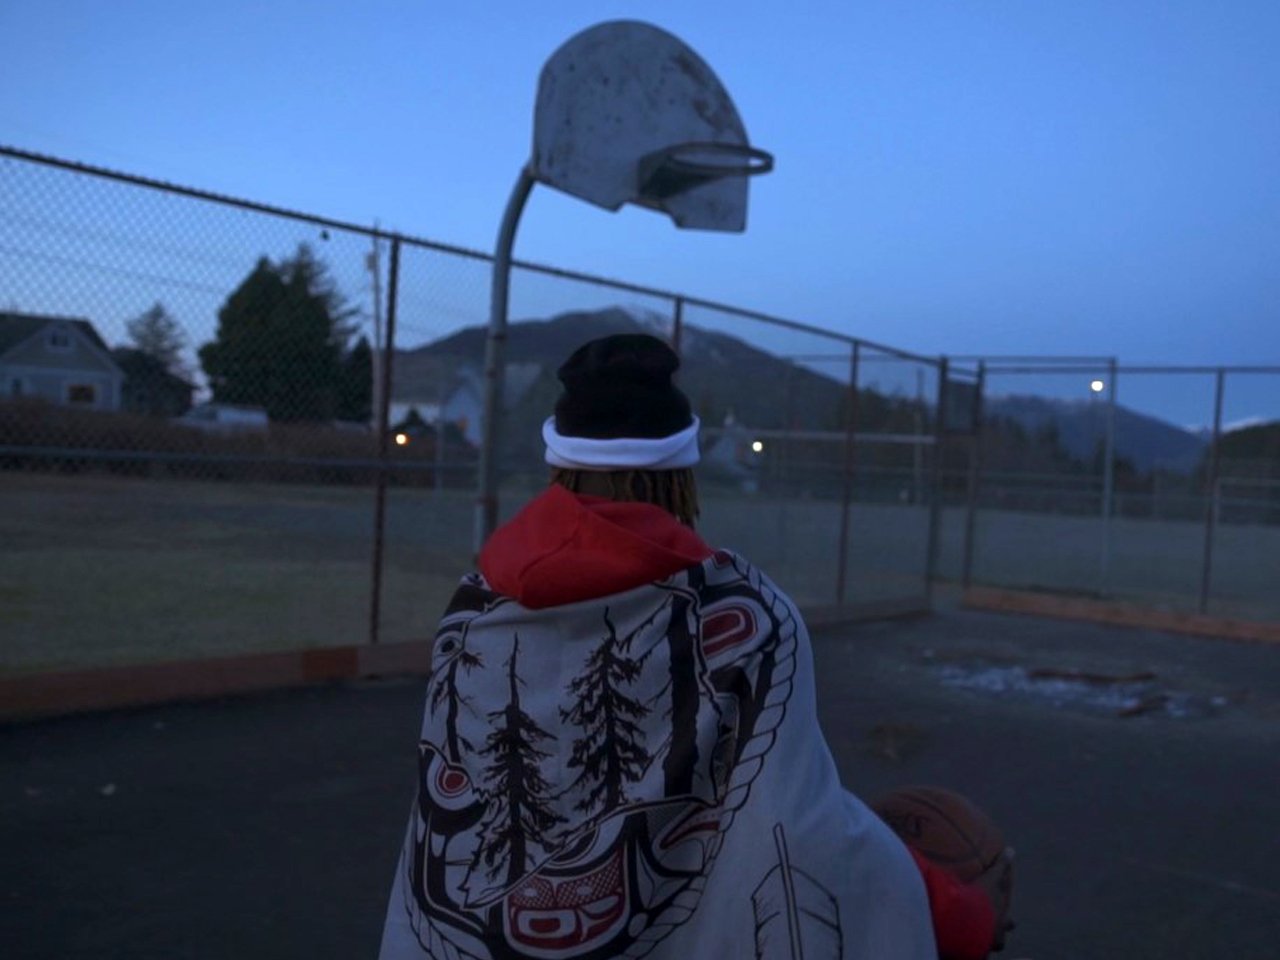 Josiah Wilson, donned in traditional garb, holds a basketball on the court.